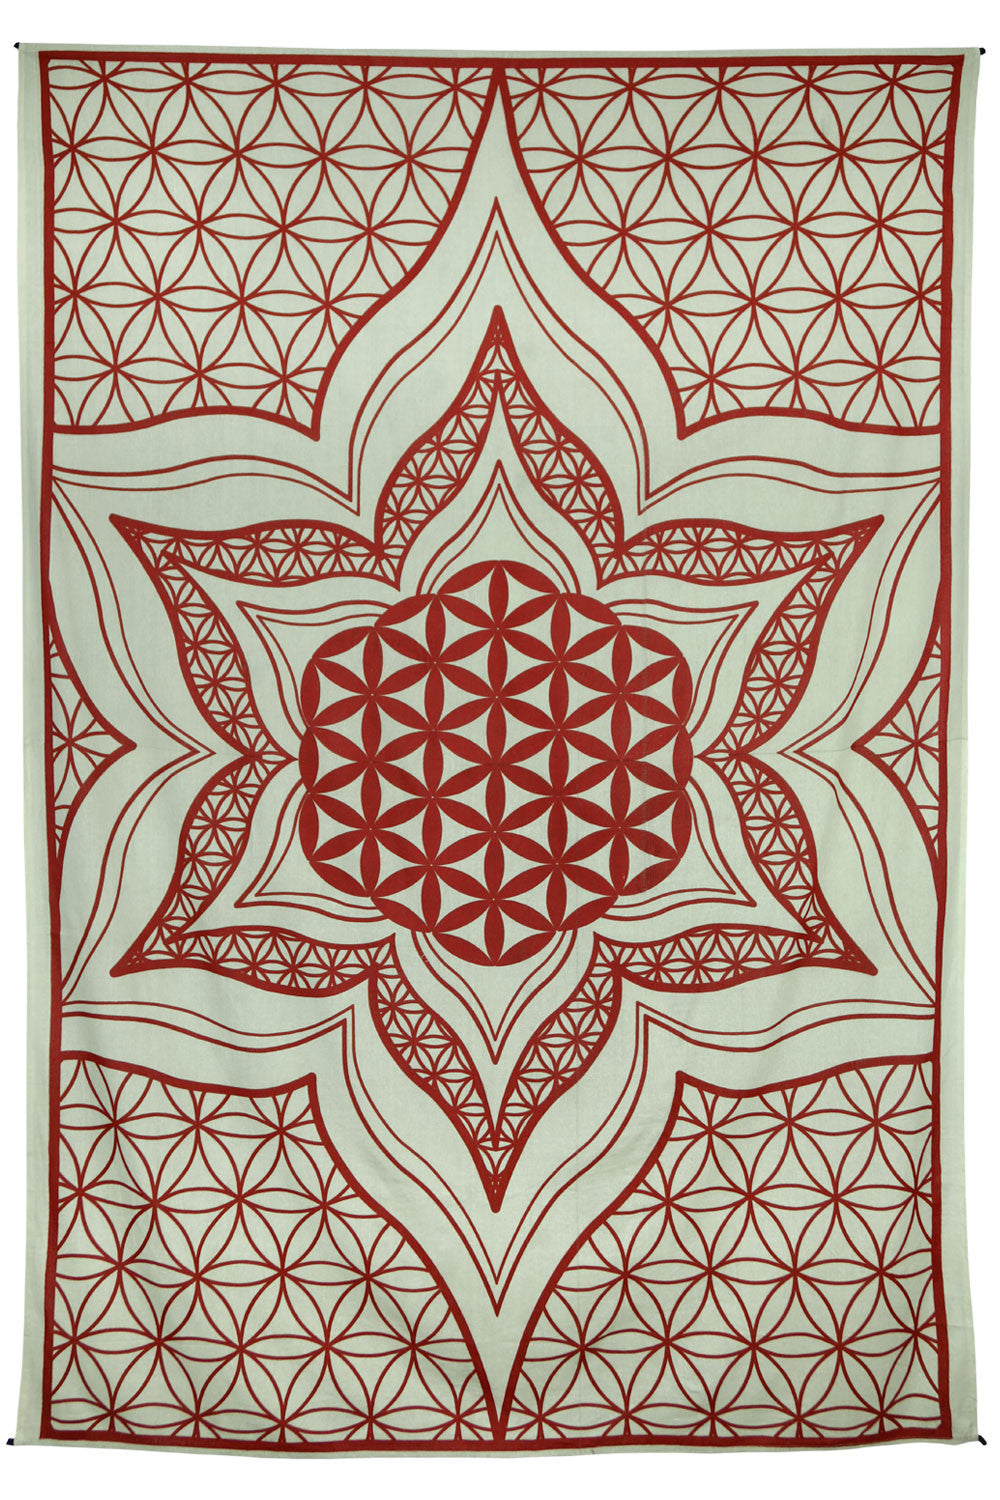 Flower Of Life Tablecloth Tapestry - HalfMoonMusic